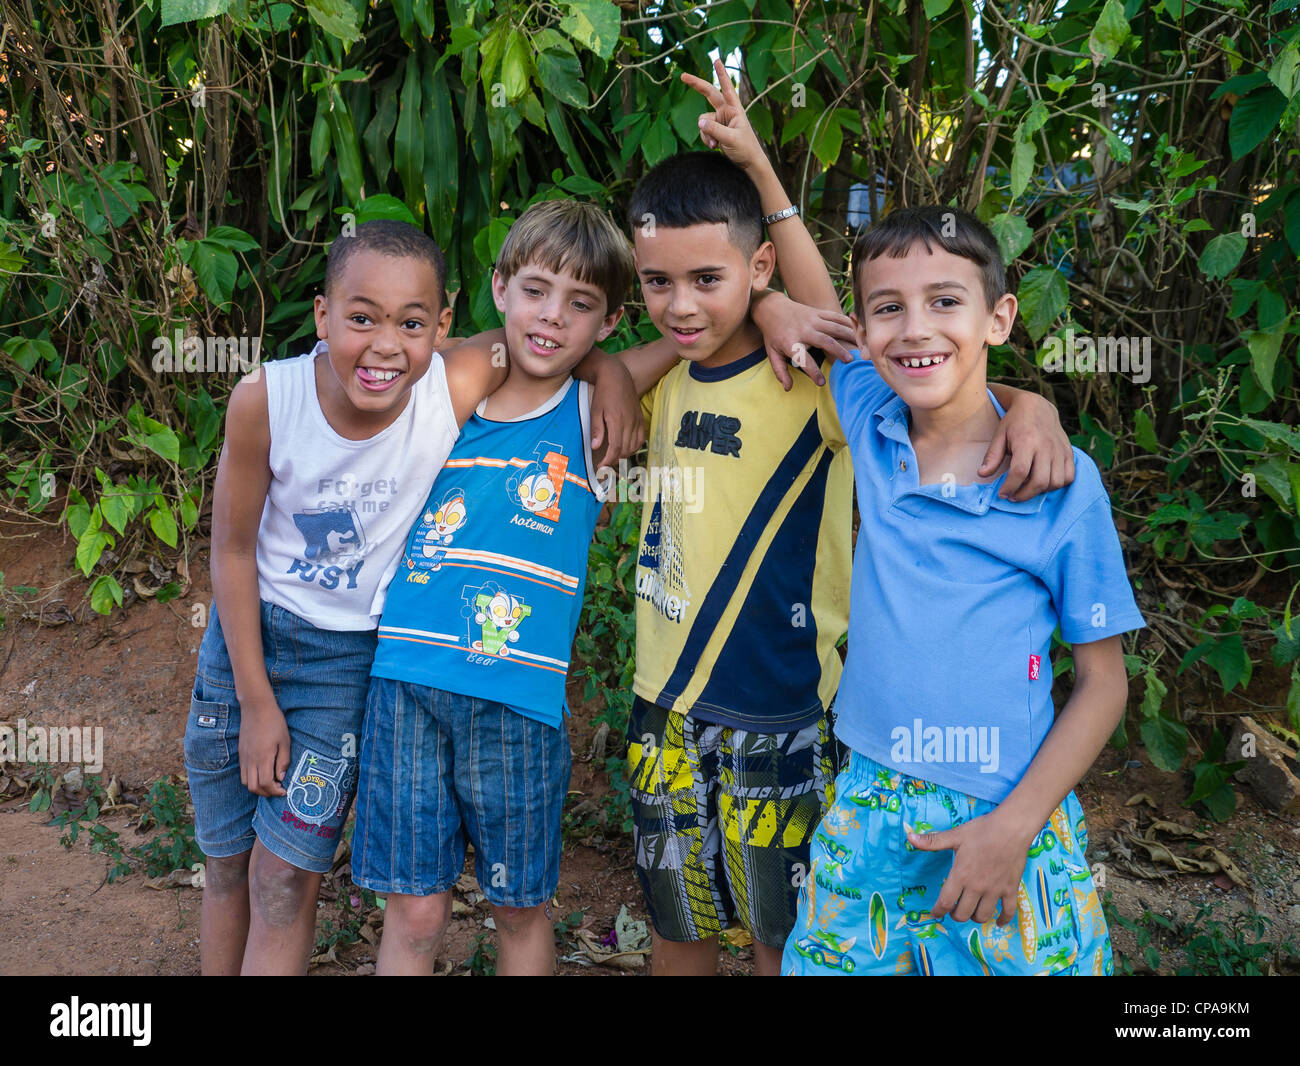 Four 10-12 year old Cuban boys play around smiling, laughing and gesturing while standing together in Viñales, Cuba. Stock Photo